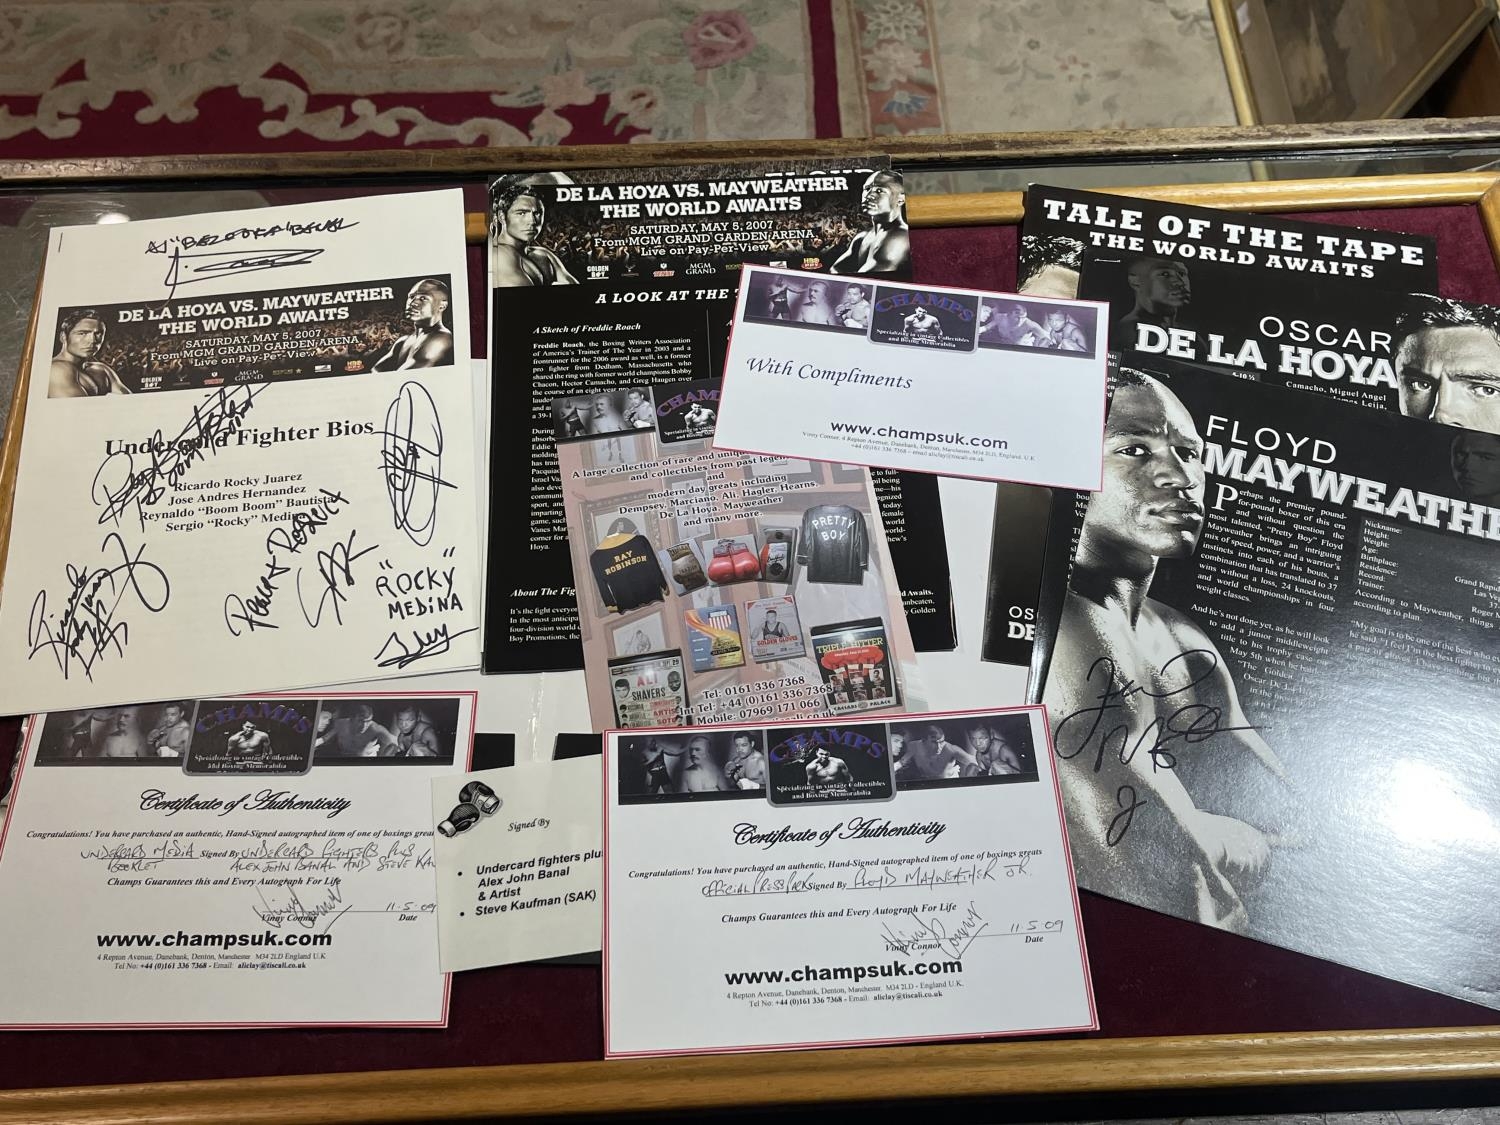 A hand signed Oscar de la Hoya VS Floyd Mayweather Junior media pack with hand signed contents and - Image 2 of 2